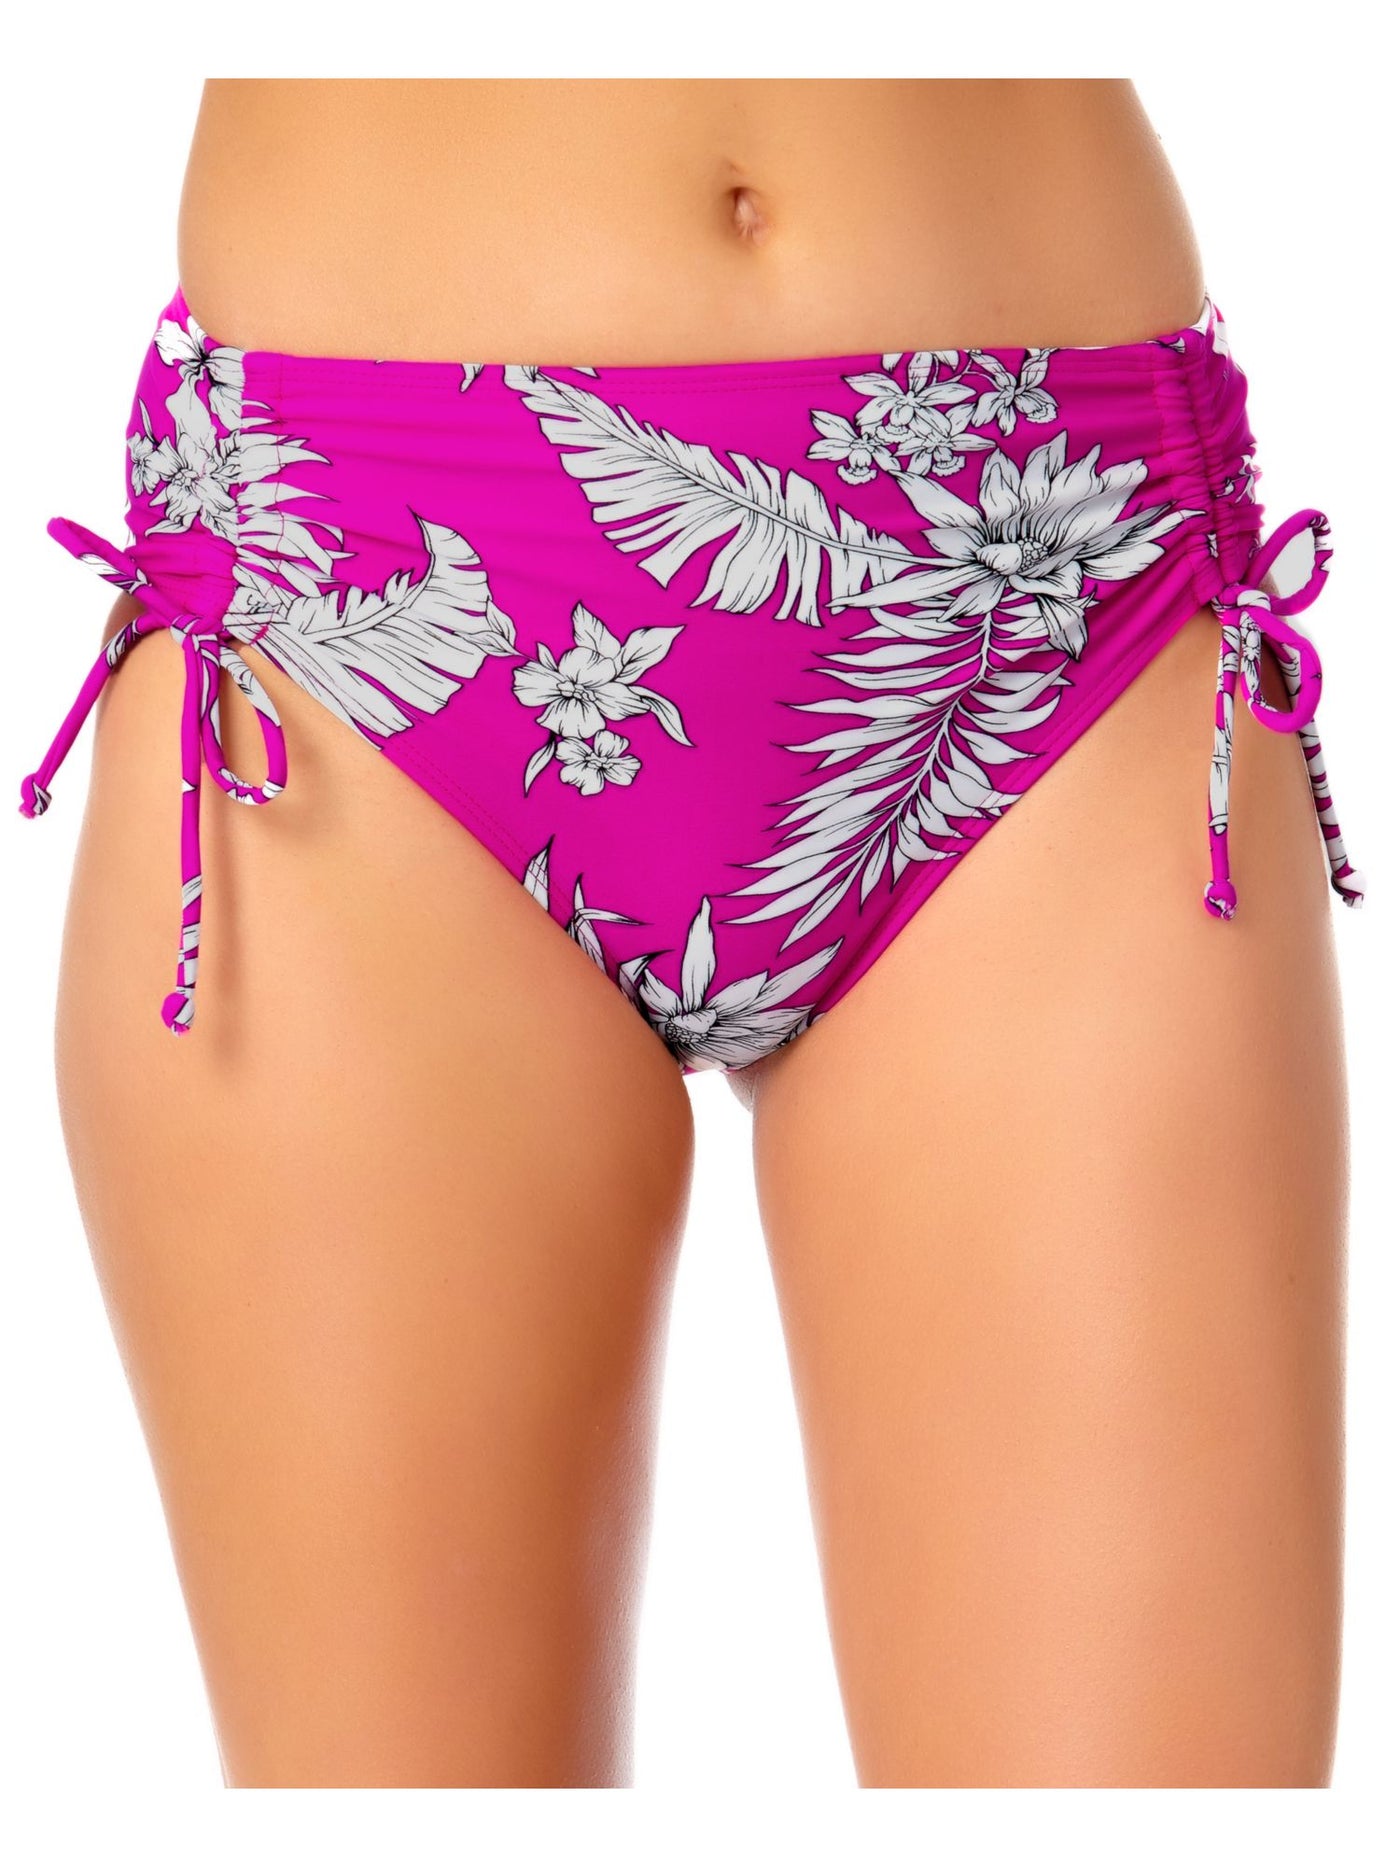 California Waves Women's Multi Color Floral Stretch Tie Details Lined Moderate Coverage Side Tie Swimsuit Bottom XL